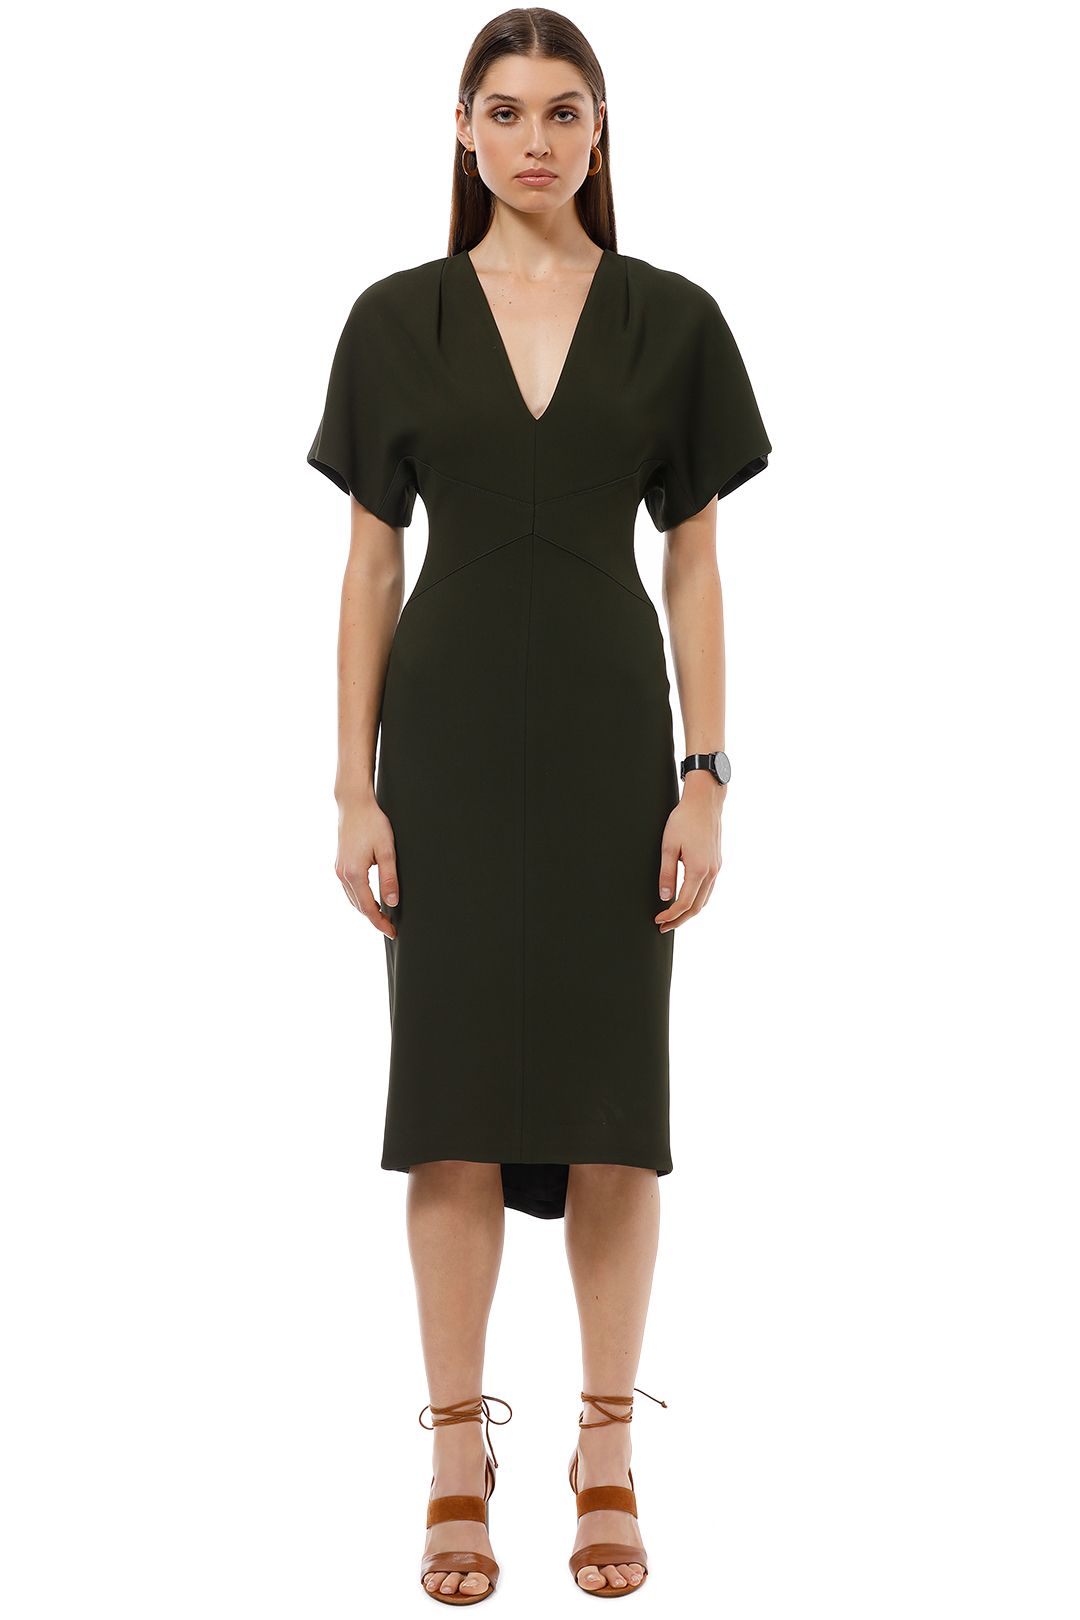 Ginger and Smart - Endure Fitted Dress - Olive - Front